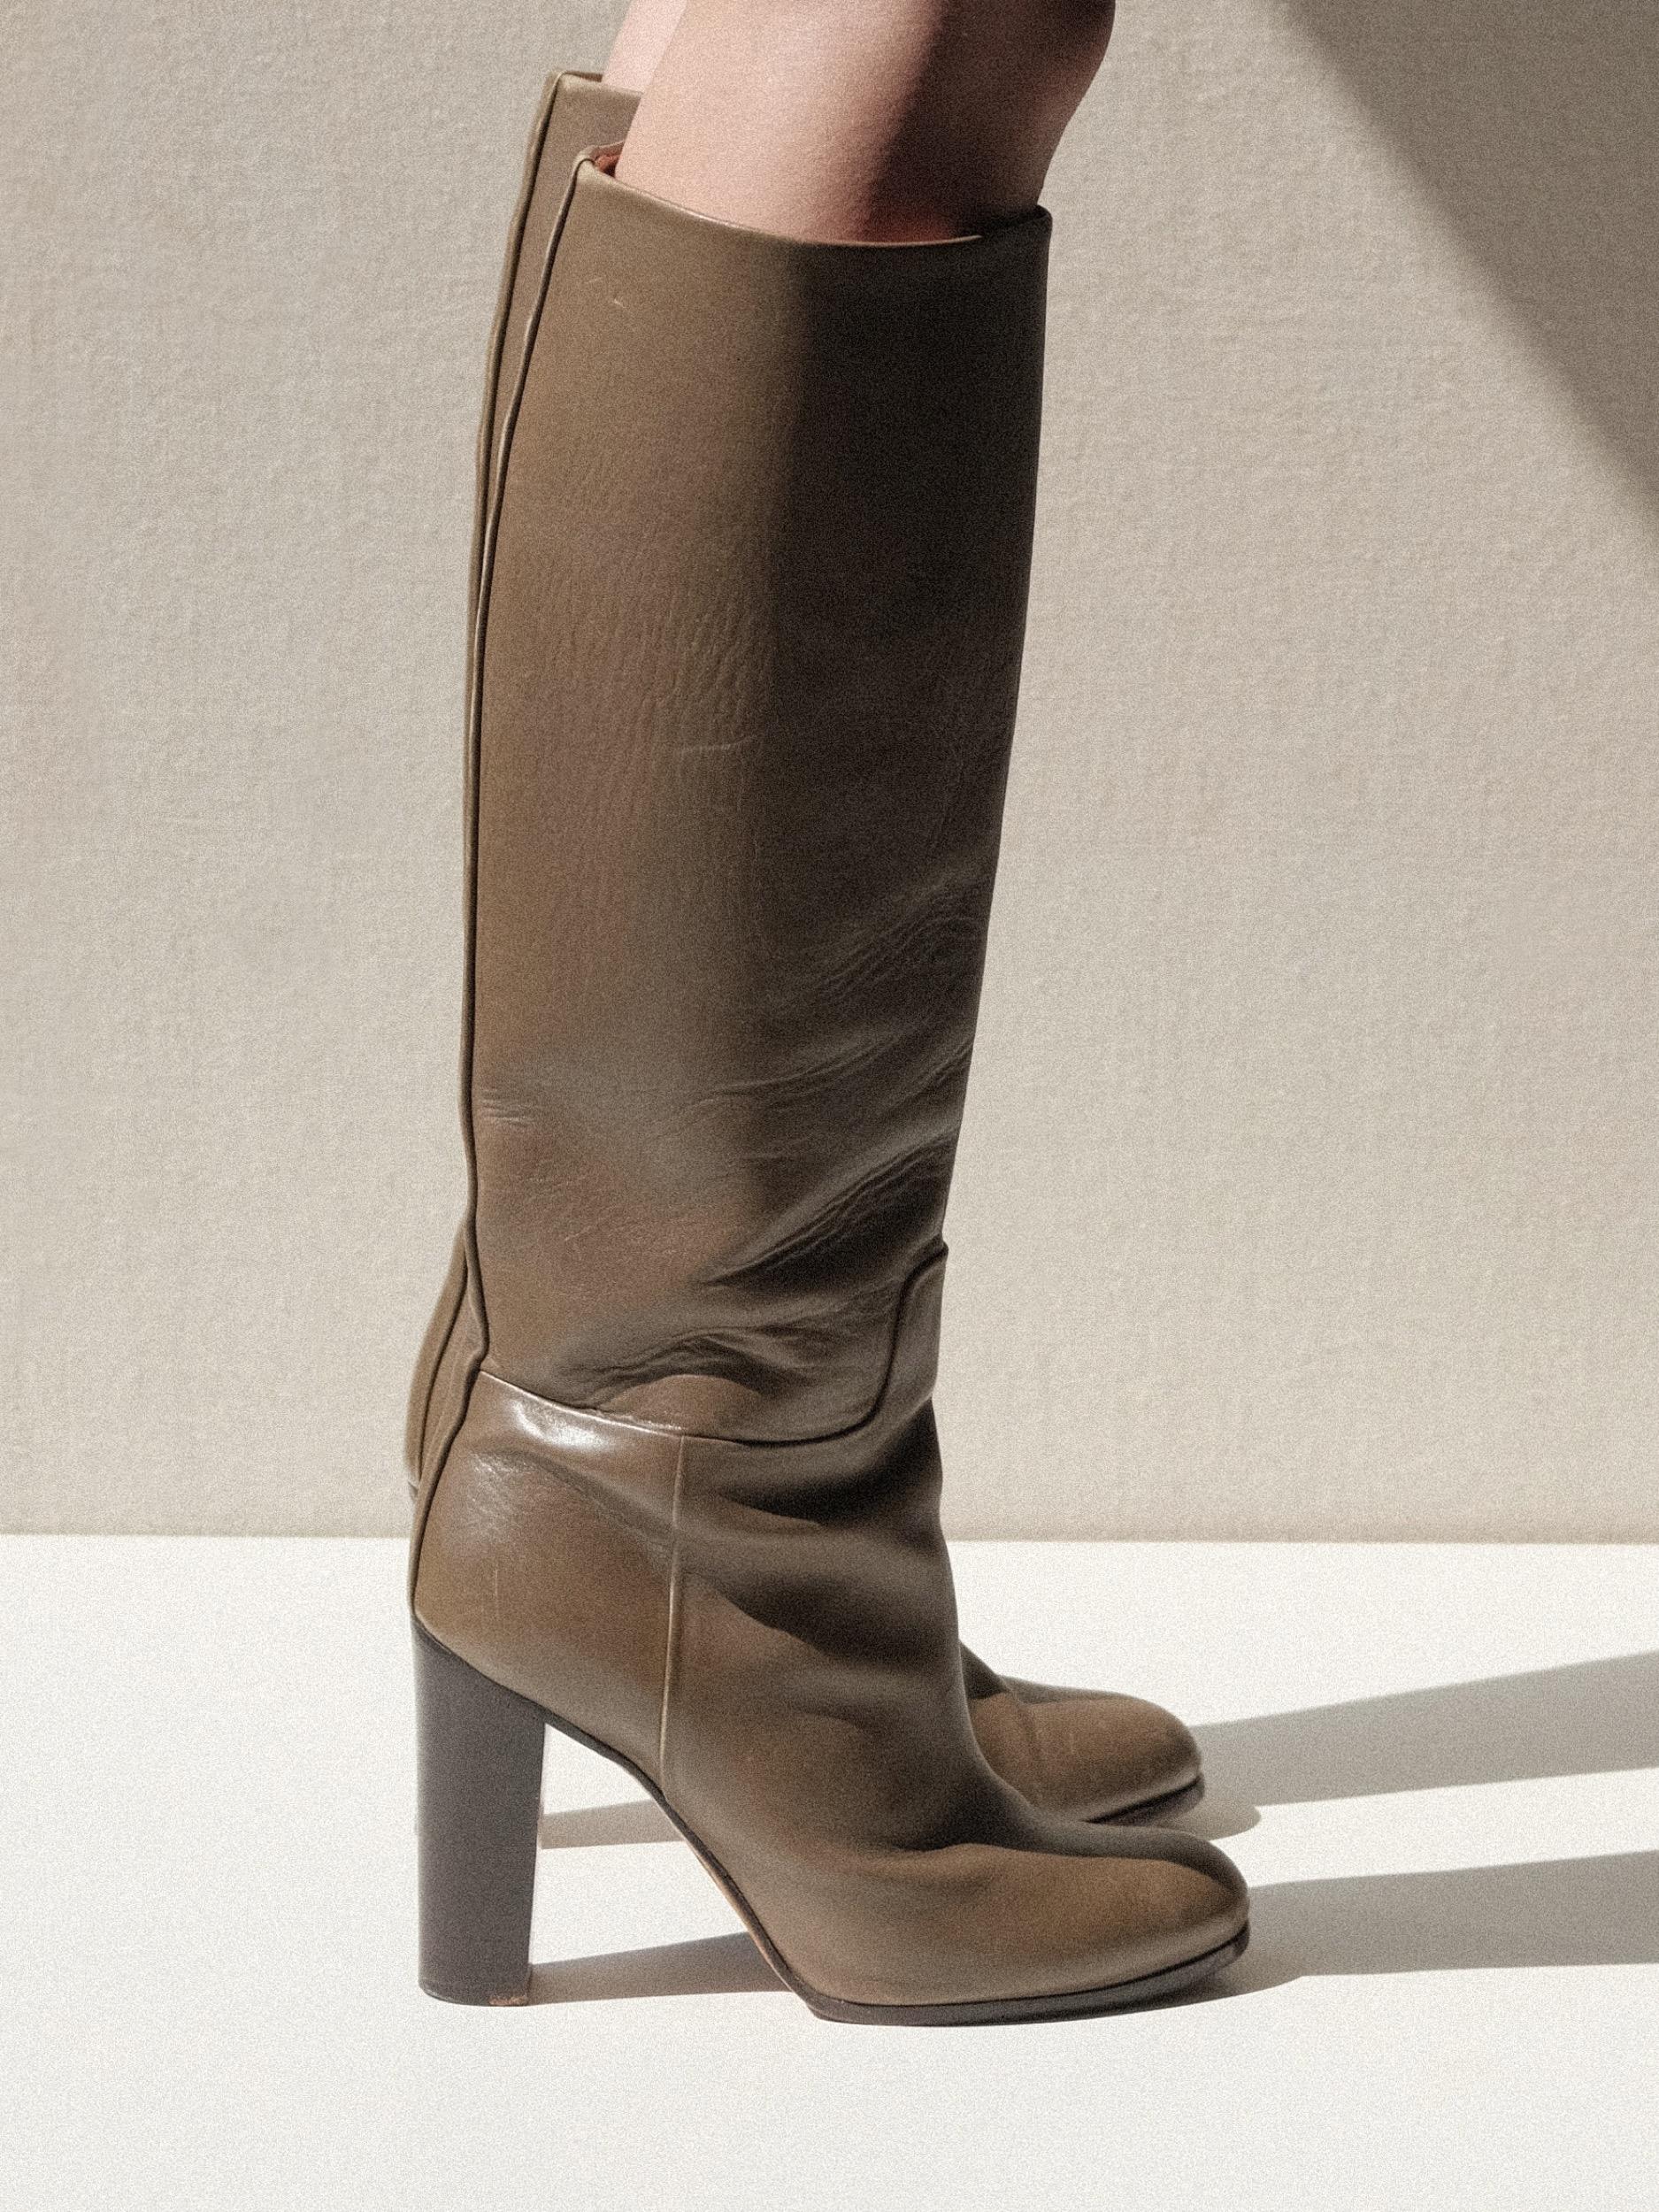 Green Leather Céline Phoebe Philo Knee High Boots 38 For Sale 4